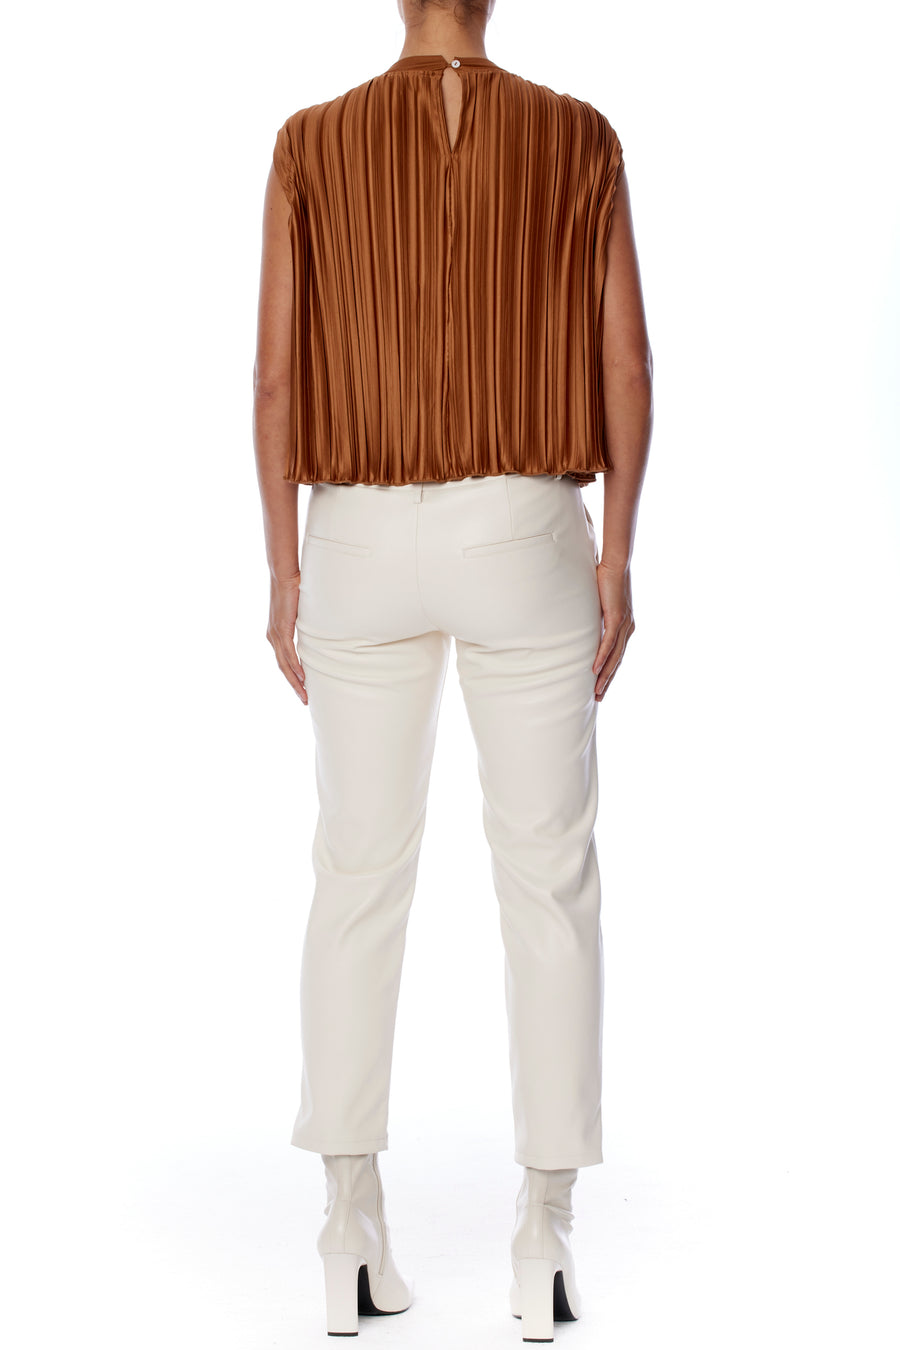 chic sleeveless, pleated cape top with a slight mock neck in rust